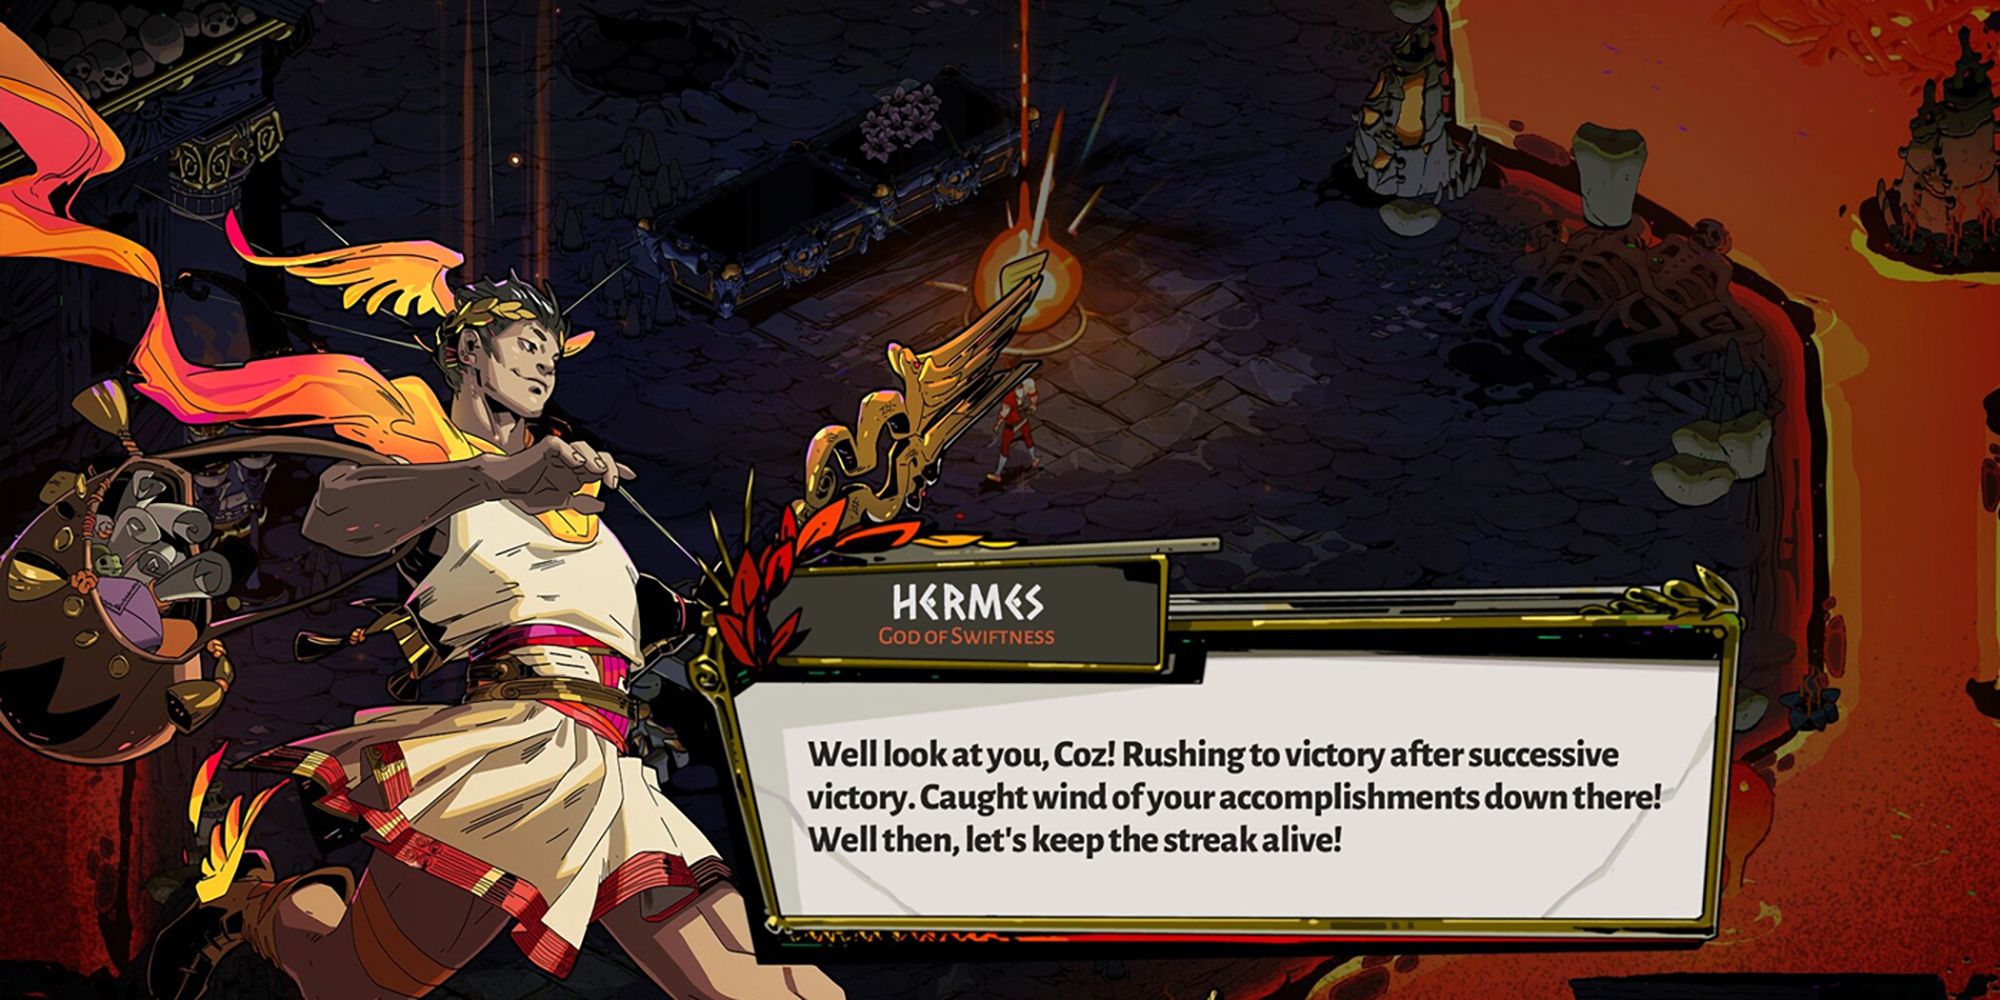 Hades - Hermes Talking About Your Winning Streak In-Game